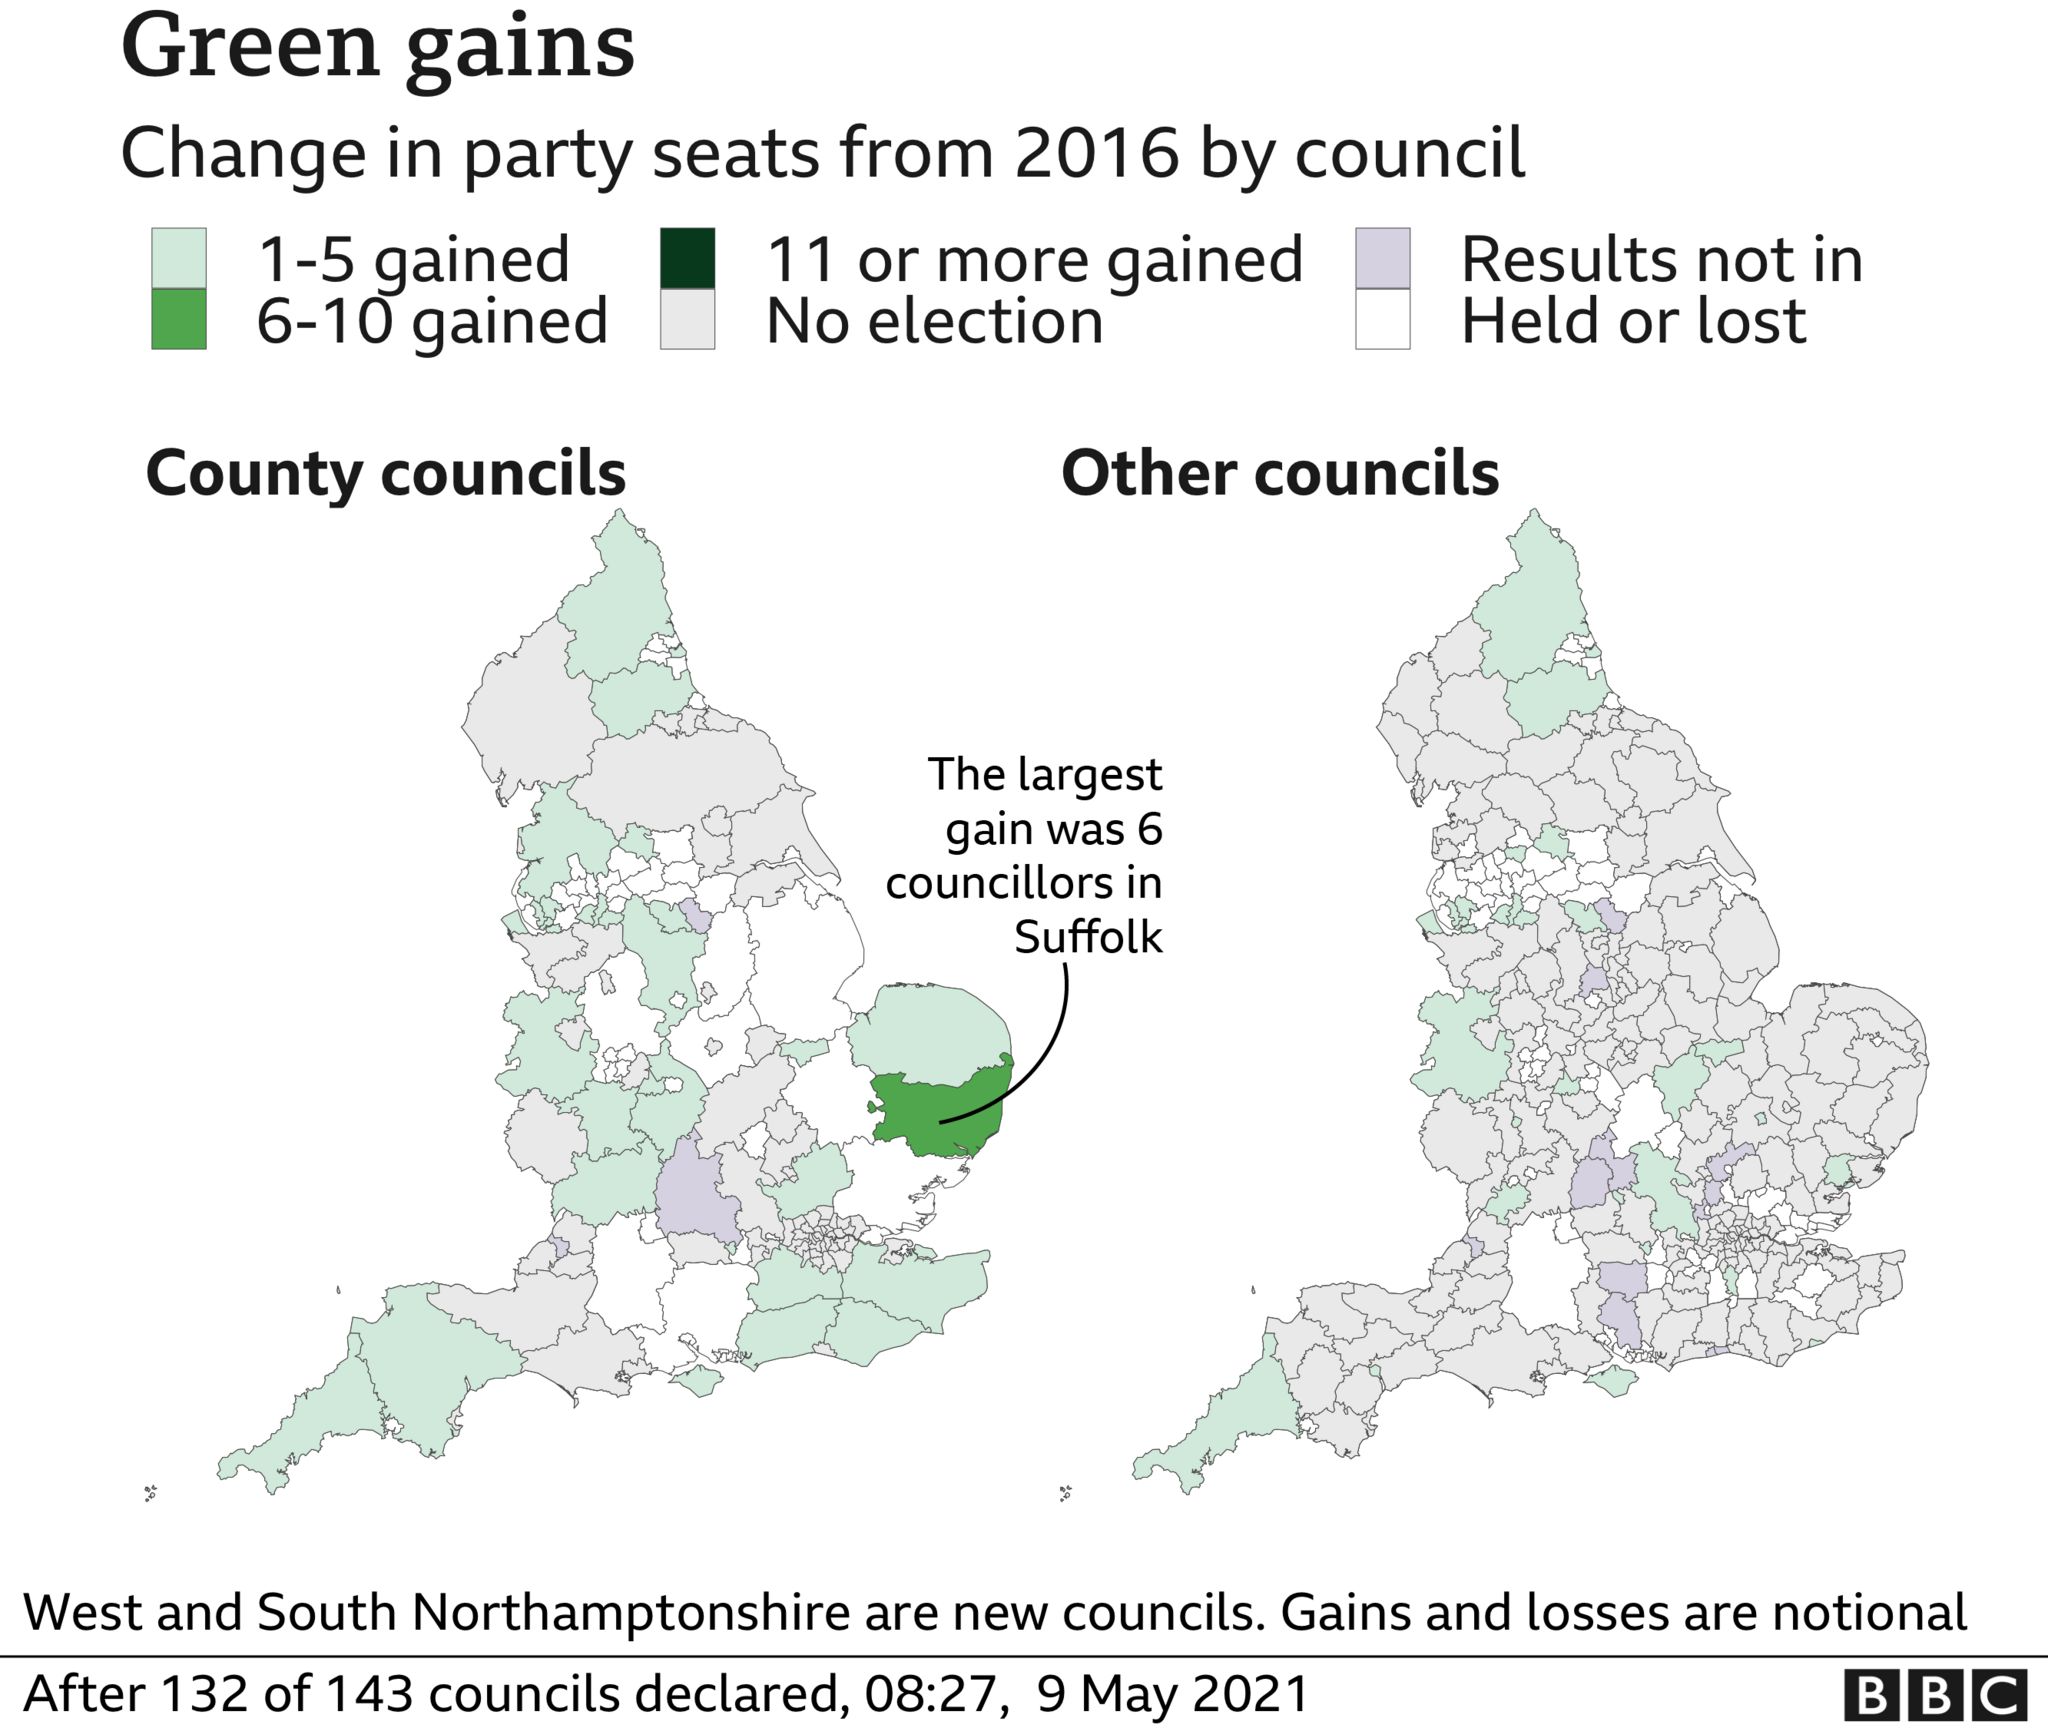 Chart showing change in party seats from 2016 by council